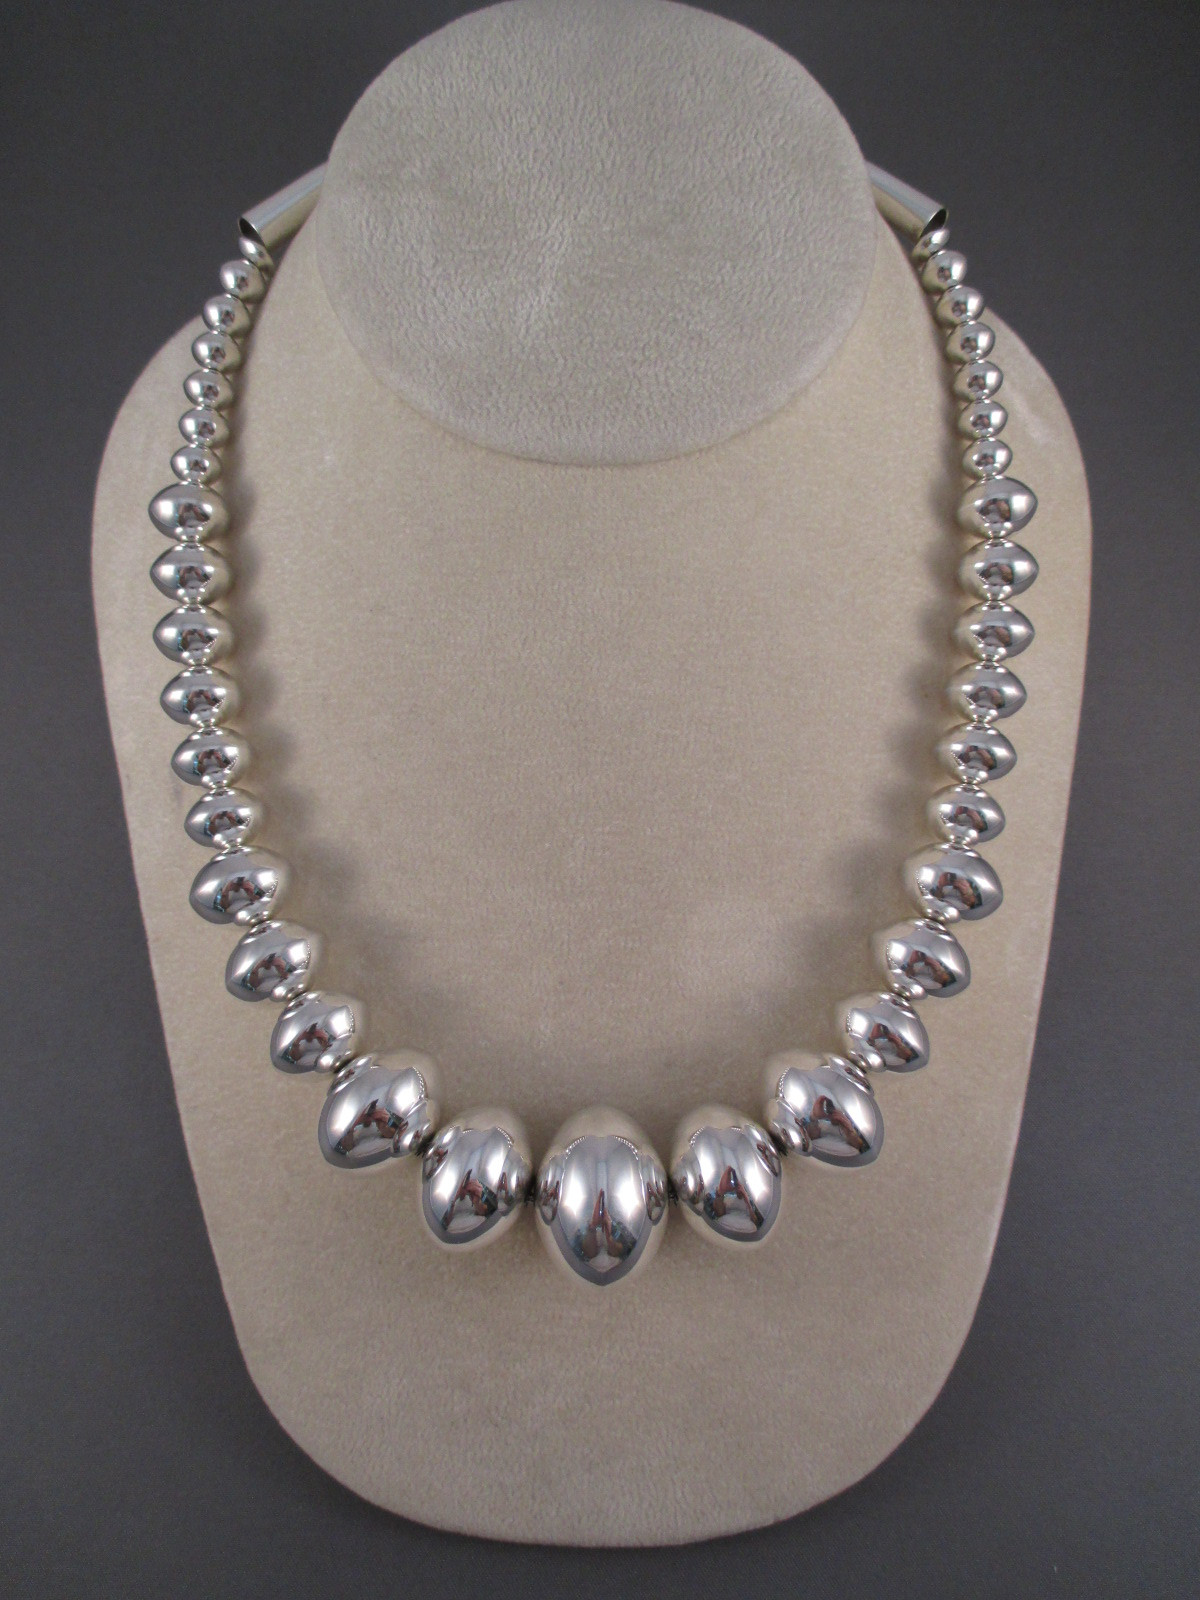 Silver Bead Necklace
 Graduated Sterling Silver Bead Necklace by Artie